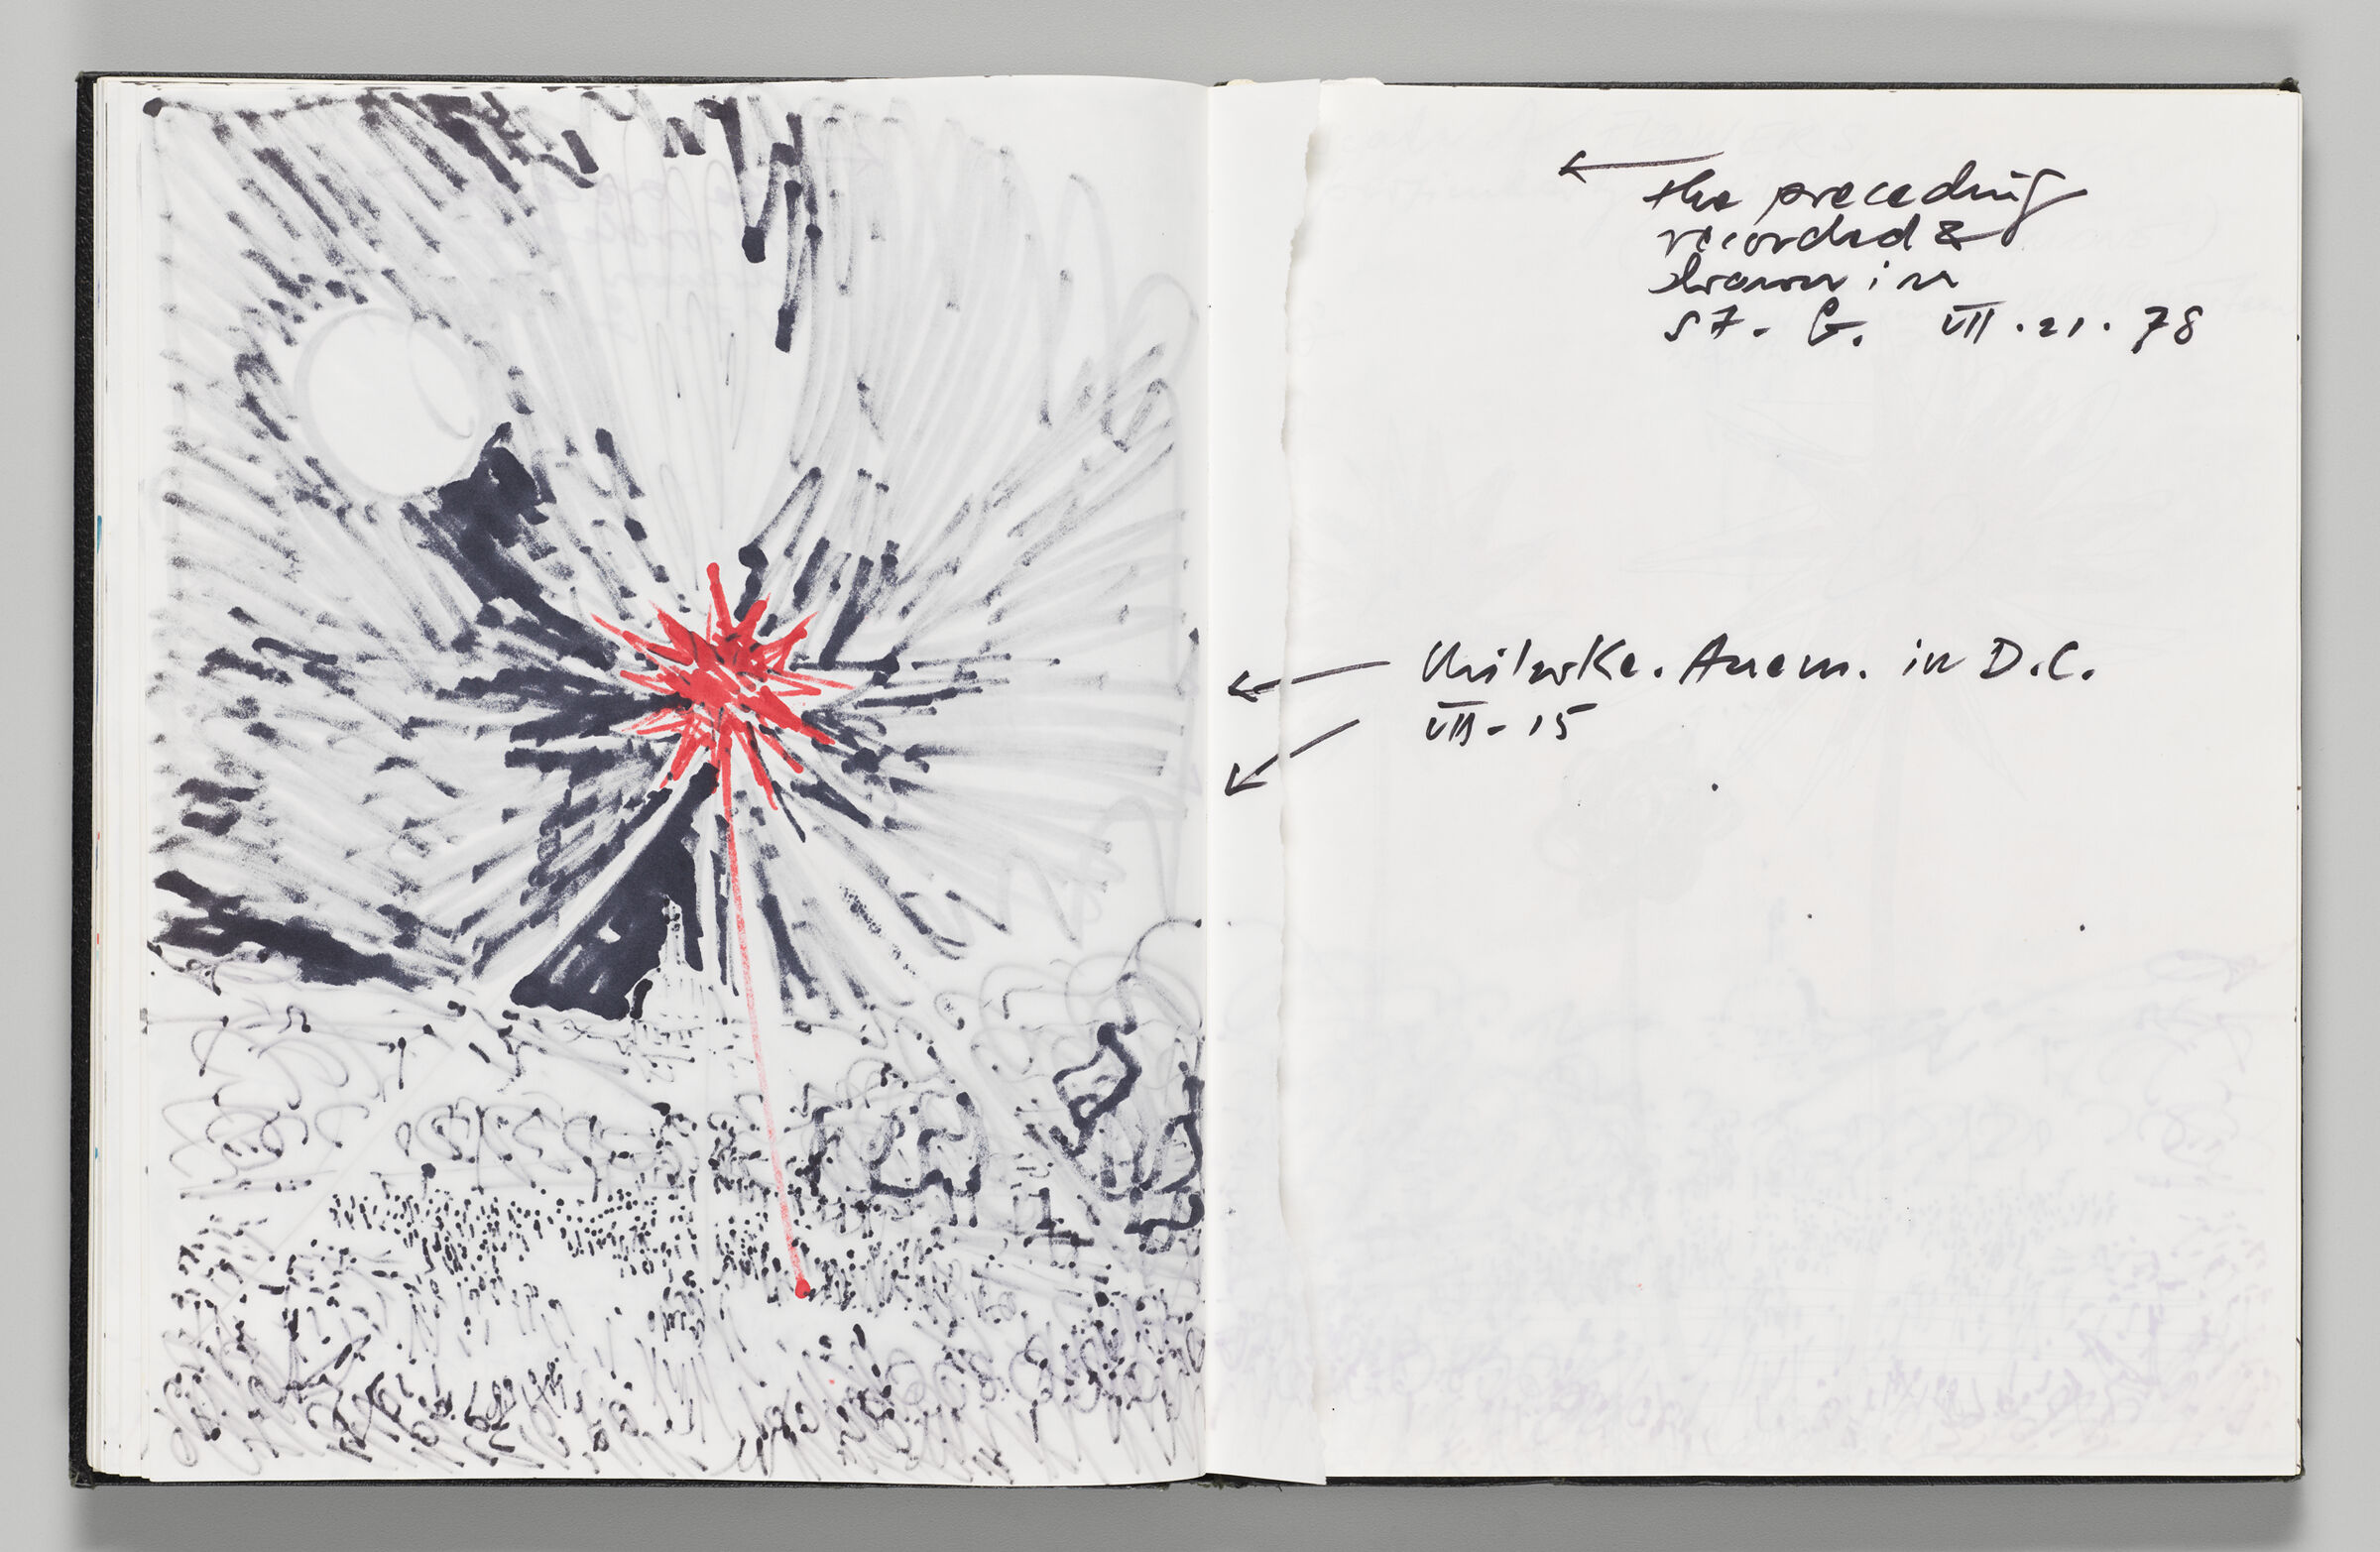 Untitled (Bleed-Through Of Previous Page With Color Transfer, Left Page); Untitled (Partial Torn Page With Arrows, Right Page)